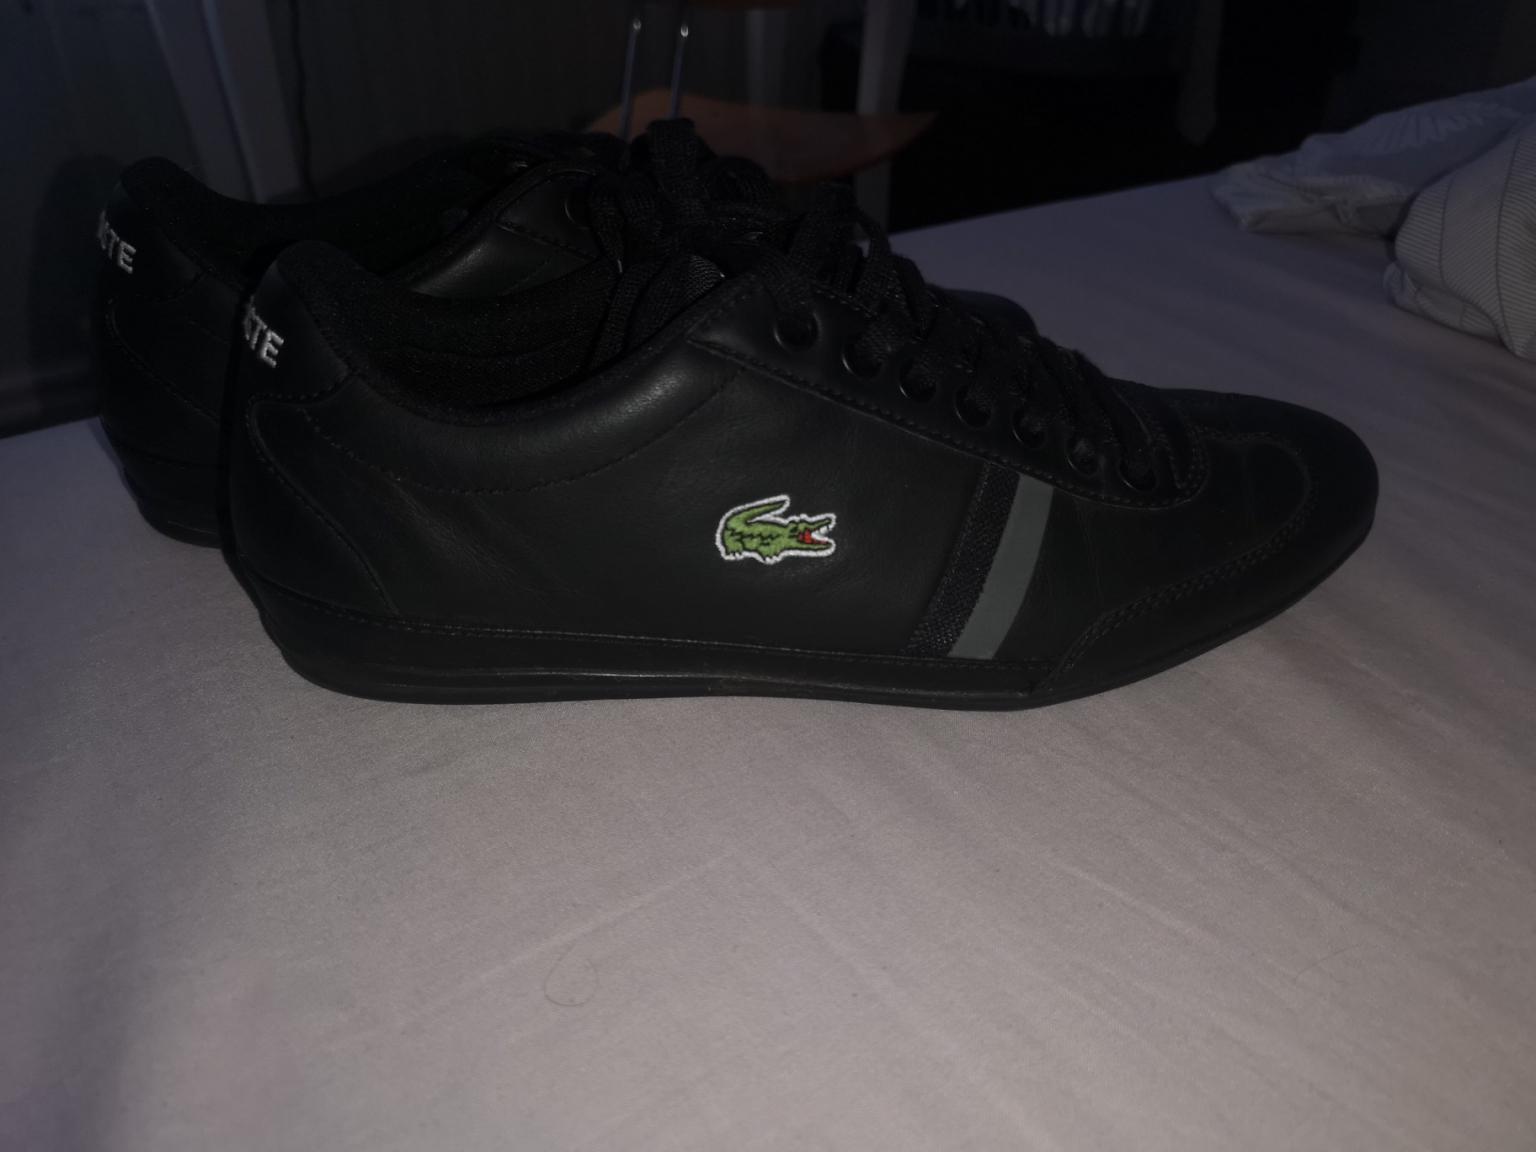 Lacoste smart shoes/trainers in L16 